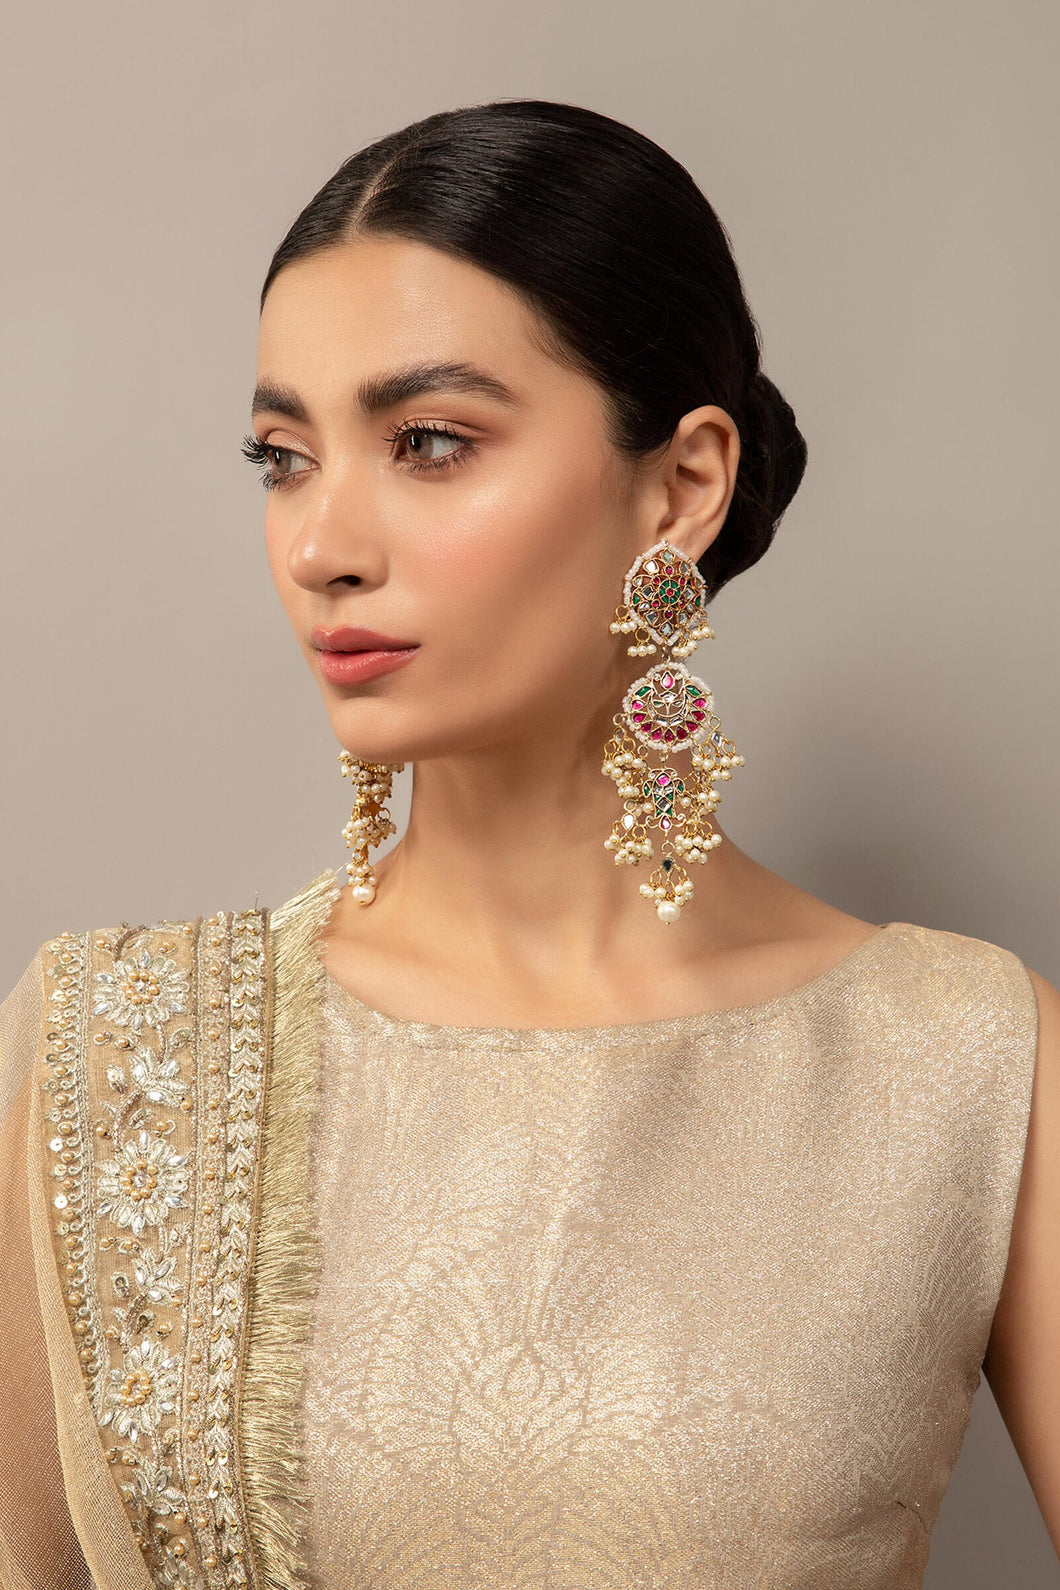 Buy Maria B Jewelry | Heritage Jewelry | JER-030 Red Chatham and Gold Lavishly exaggerated high quality Zircon fine earring This jewelry is from Maria B Heritage Collection 2022 in the UK USA and Australia. We are the largest stockist of Maria B Pakistani Jewelry, Ring Jhoomar Ranihaar necklace and earrings.